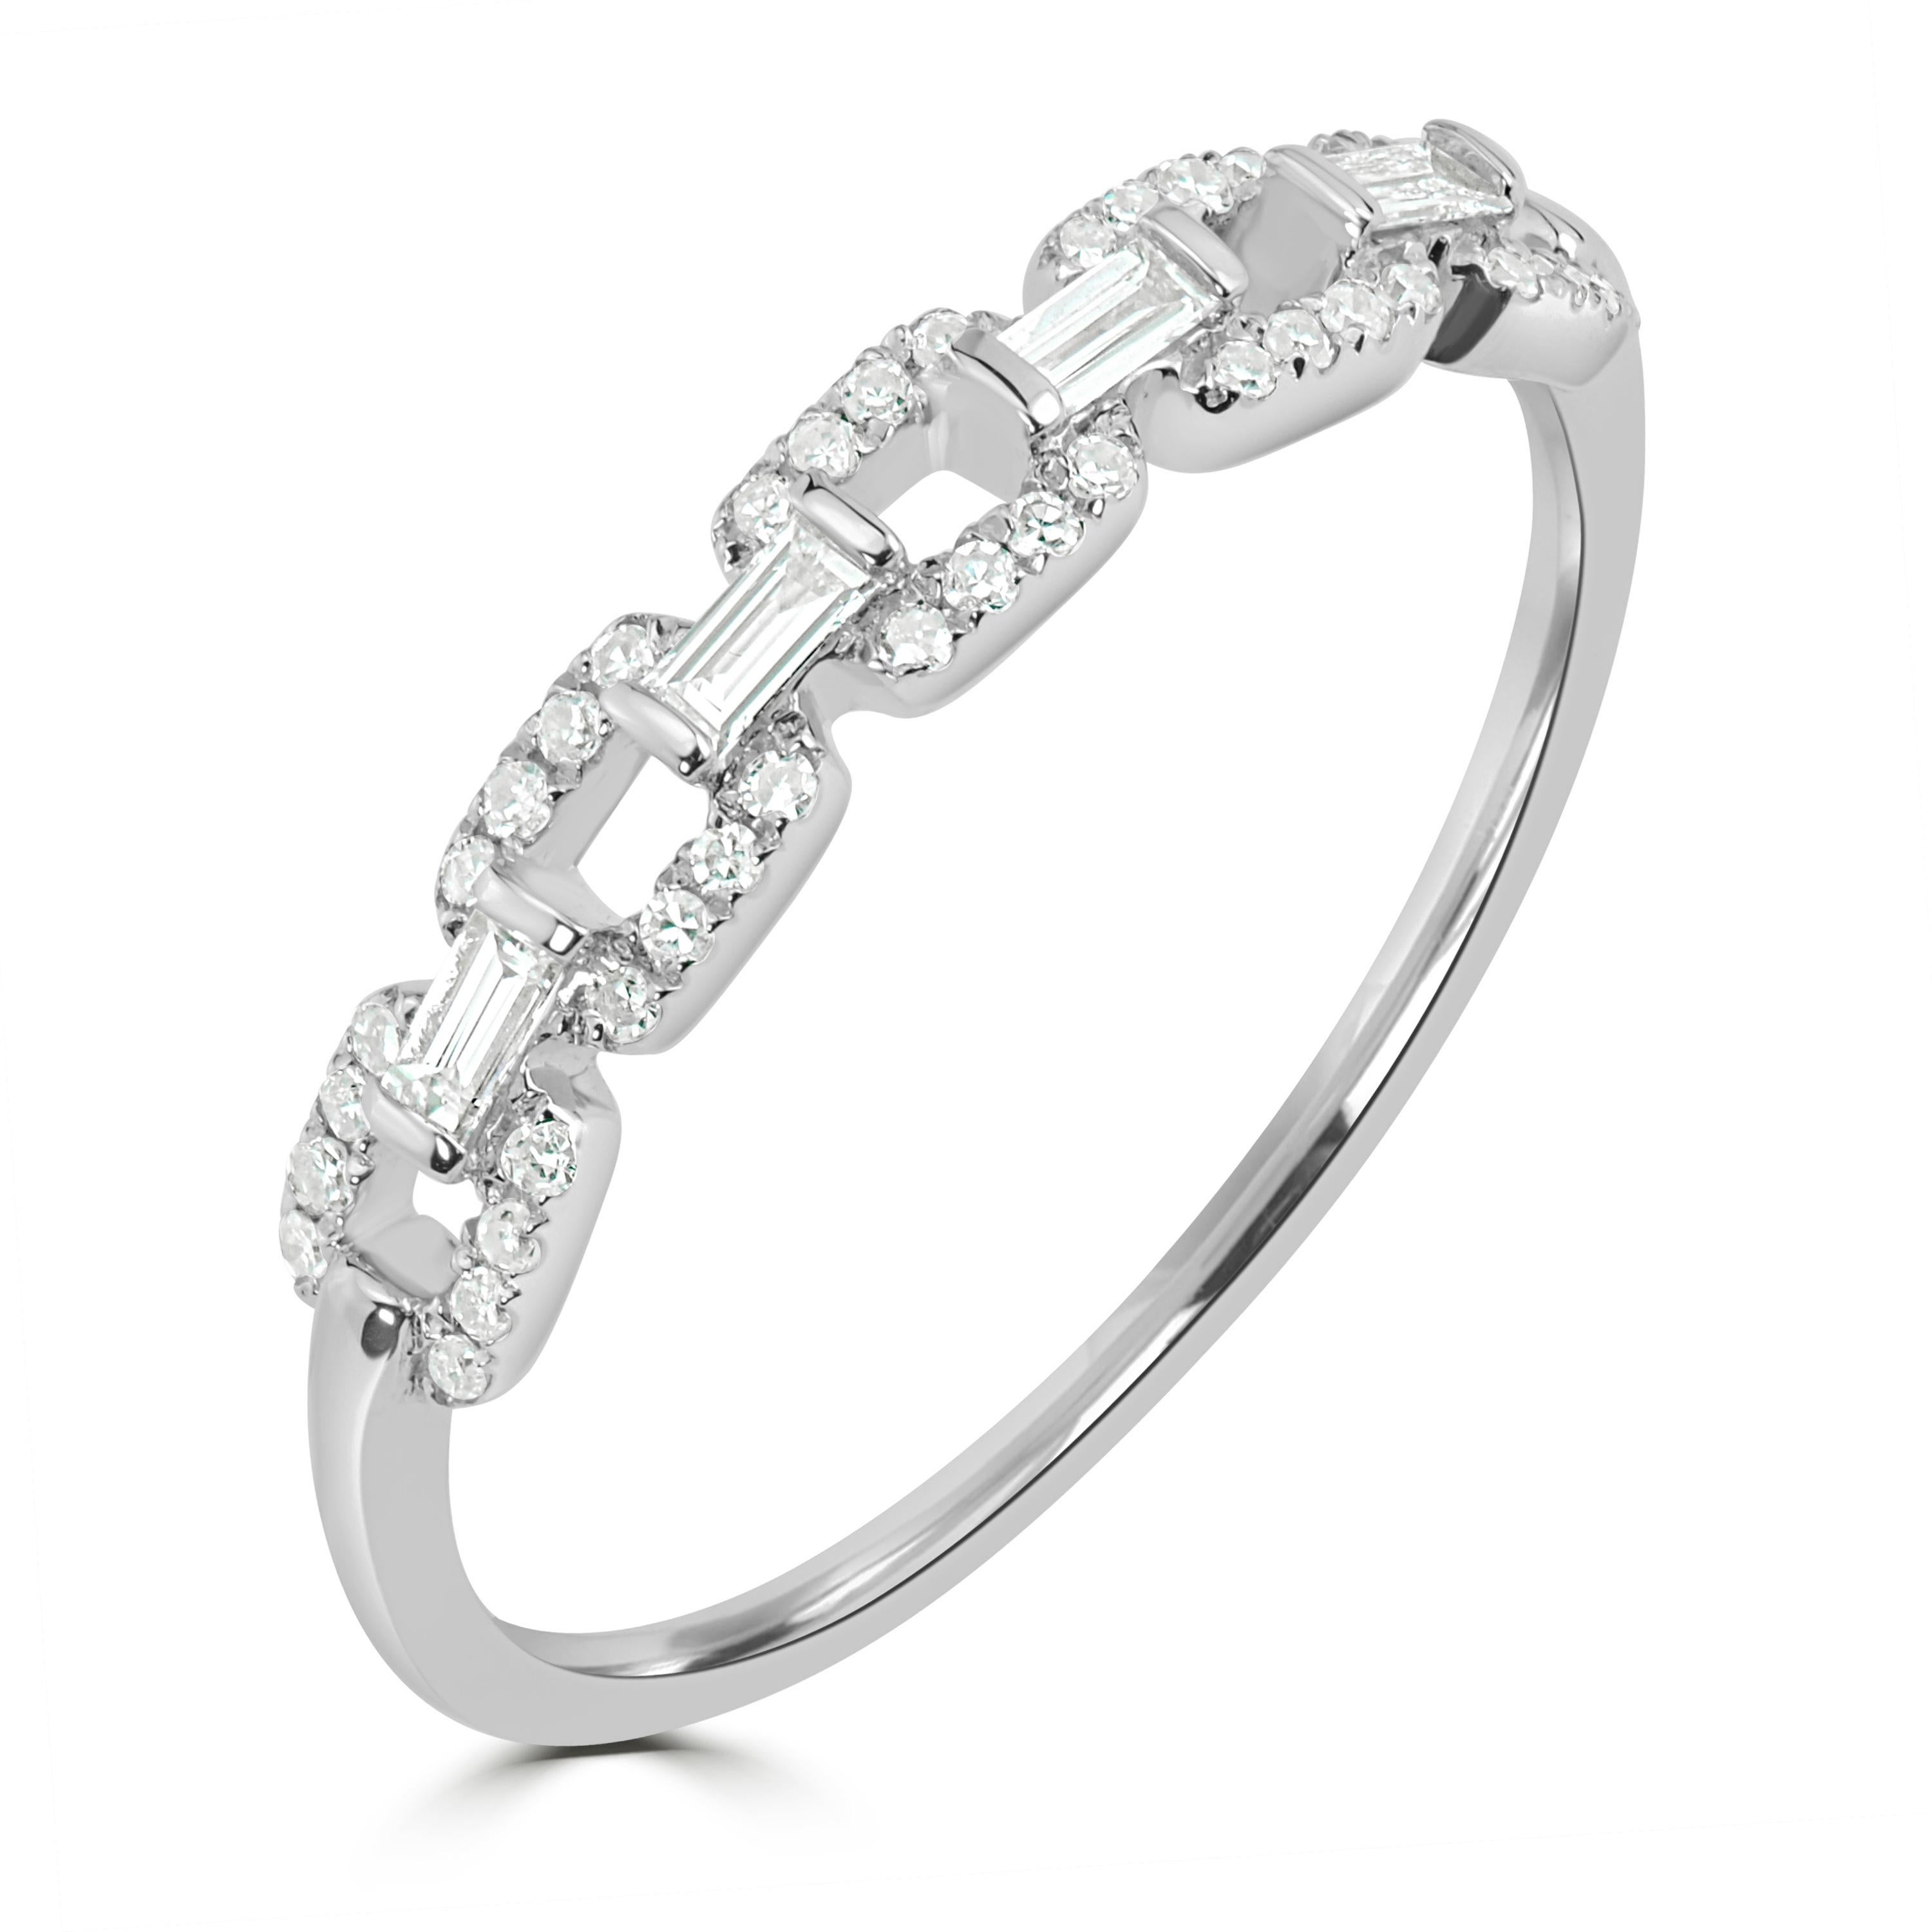 Look your best by donning this Luxle graceful ring crafted in 14K while gold that is a cocktail of 40 Round Single-Cut and 4 Baguette Full-Cut White Diamonds in micro pave and half bezel settings, respectively. This size 8 ring is one of the